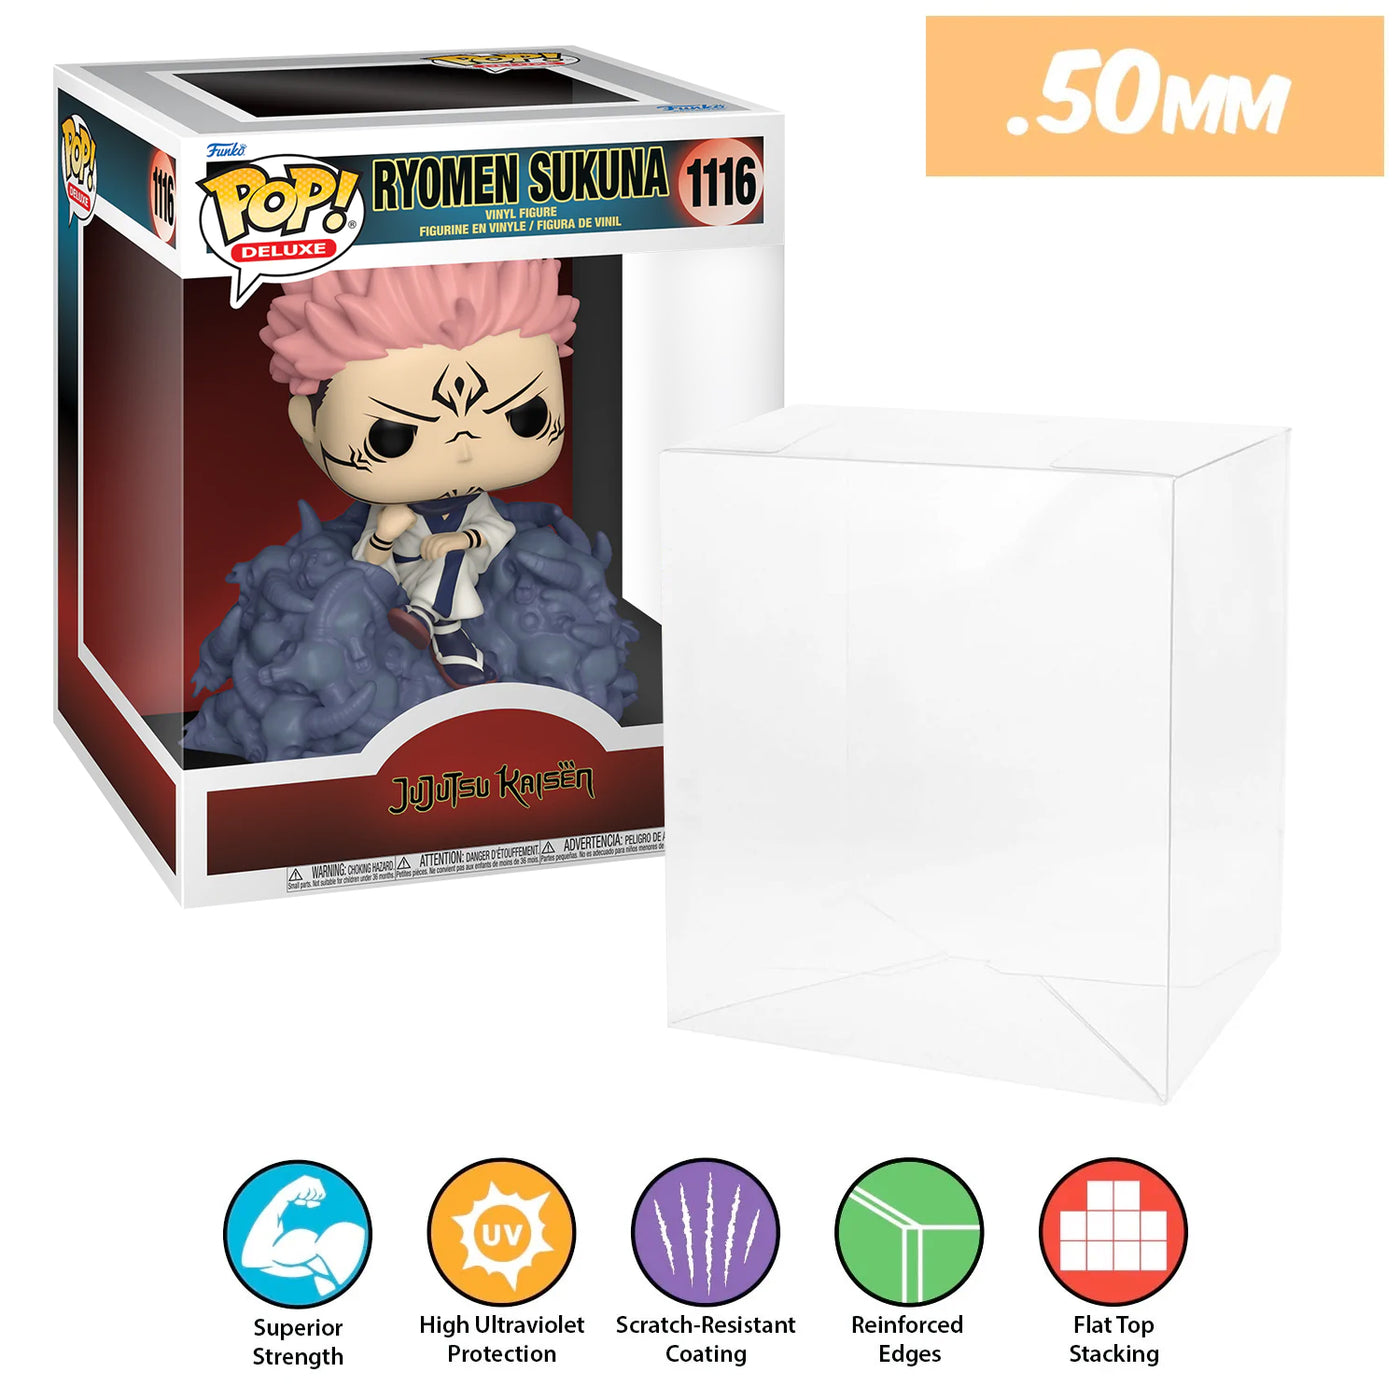 pop deluxe ryomen sukuna 1116 best funko pop protectors thick strong uv scratch flat top stack vinyl display geek plastic shield vaulted eco armor fits collect protect display case kollector protector